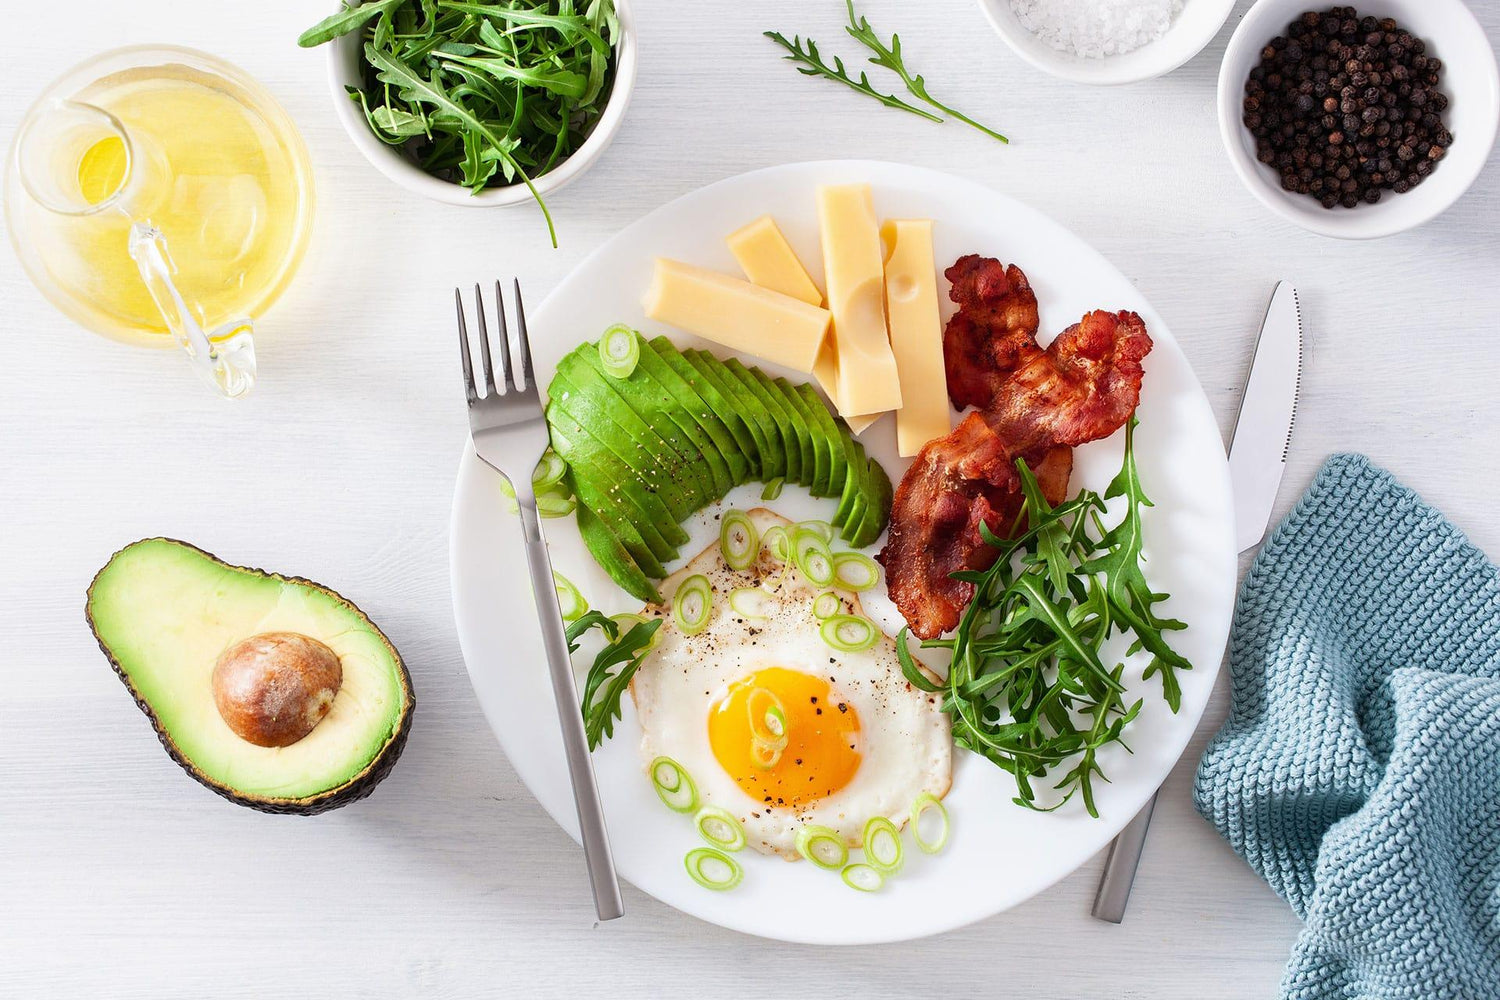 Overhead view of keto-friendly brunch foods on white table